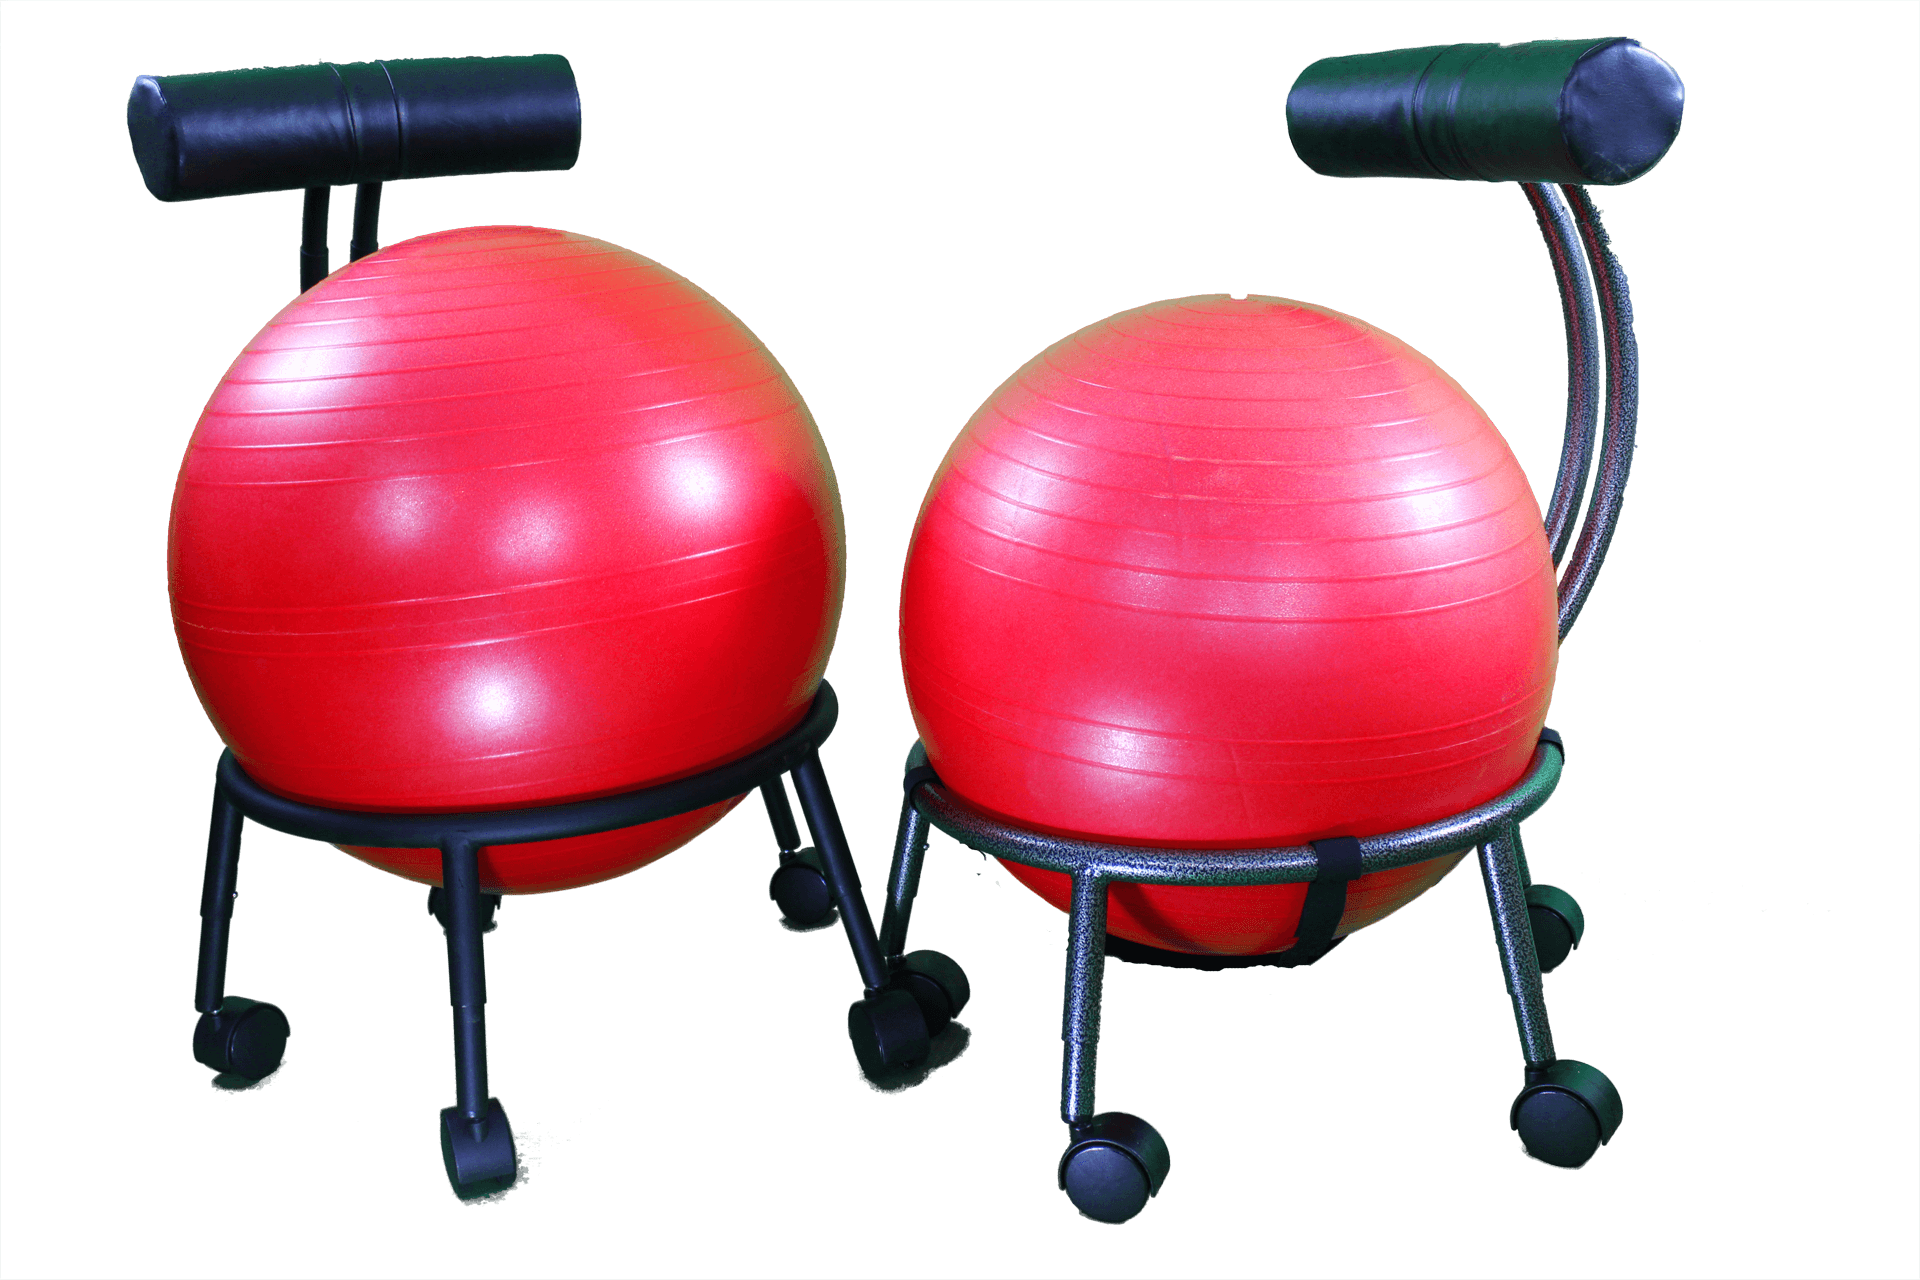 Therapeutic Ball Seat-Helps Build a Healthier Back, Align the Spine, Relieve Pain, and Improve Your Overall Well-Being